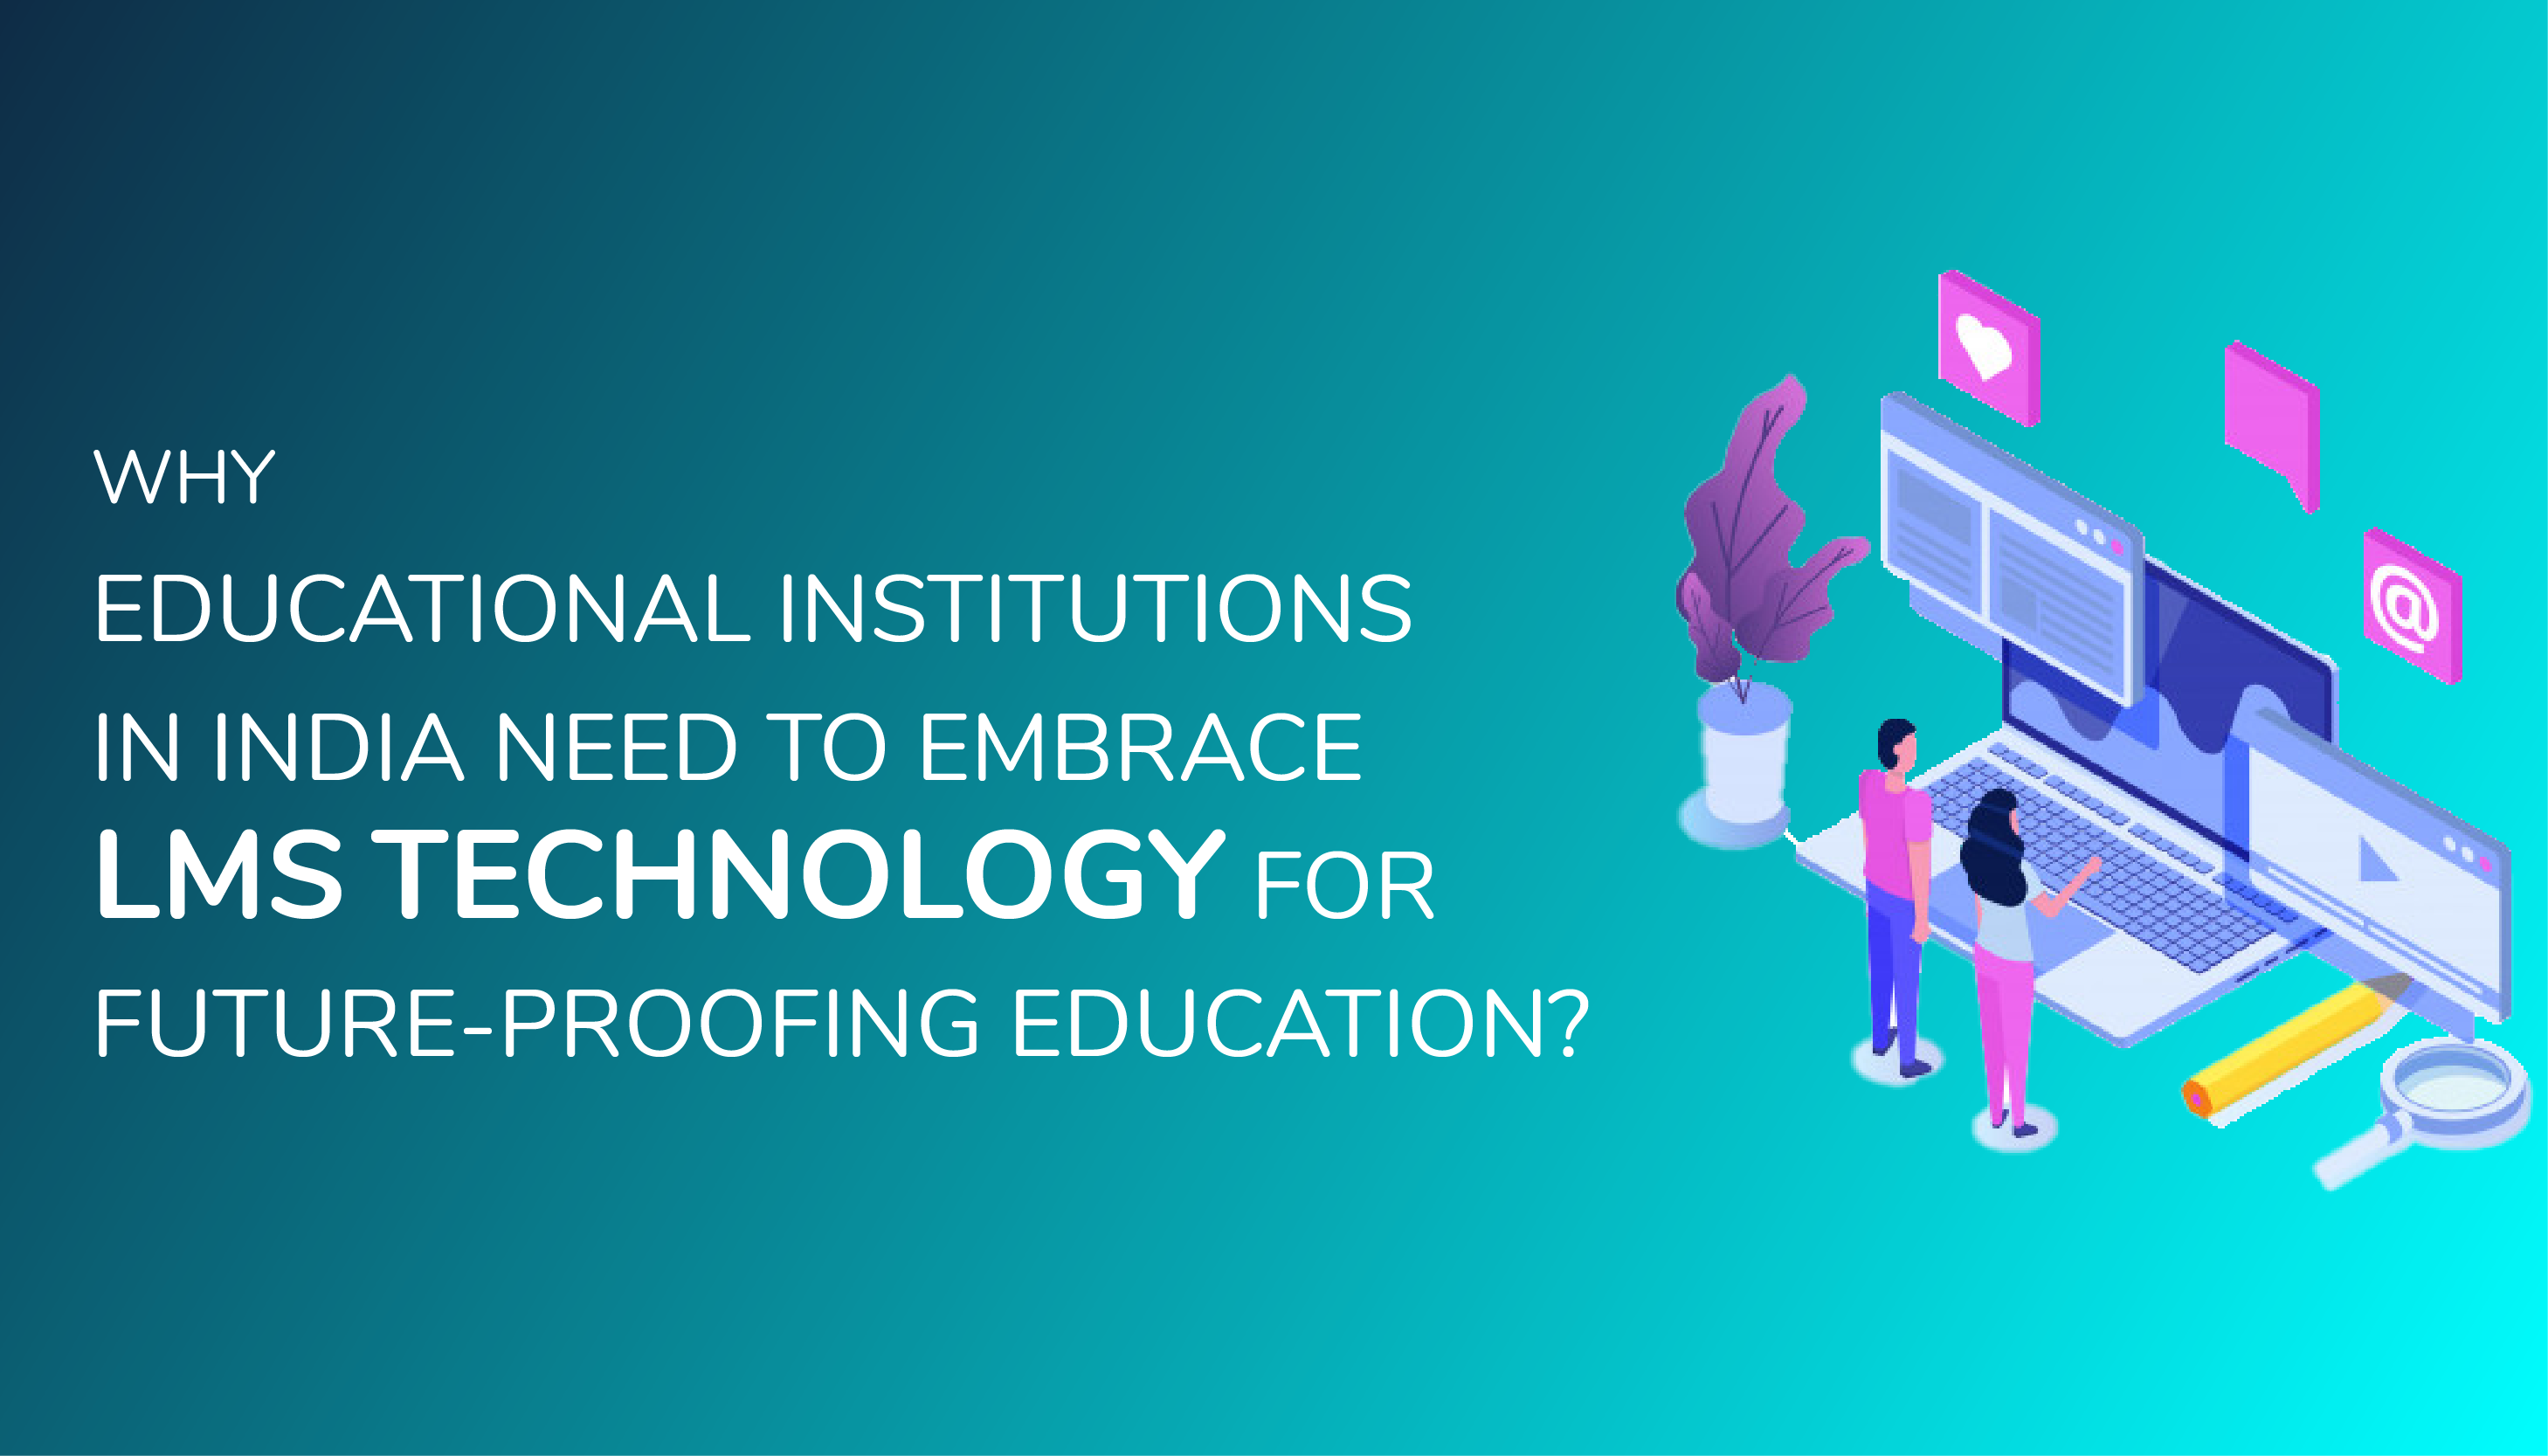 Why should educational institutes in India embrace LMS Technology?